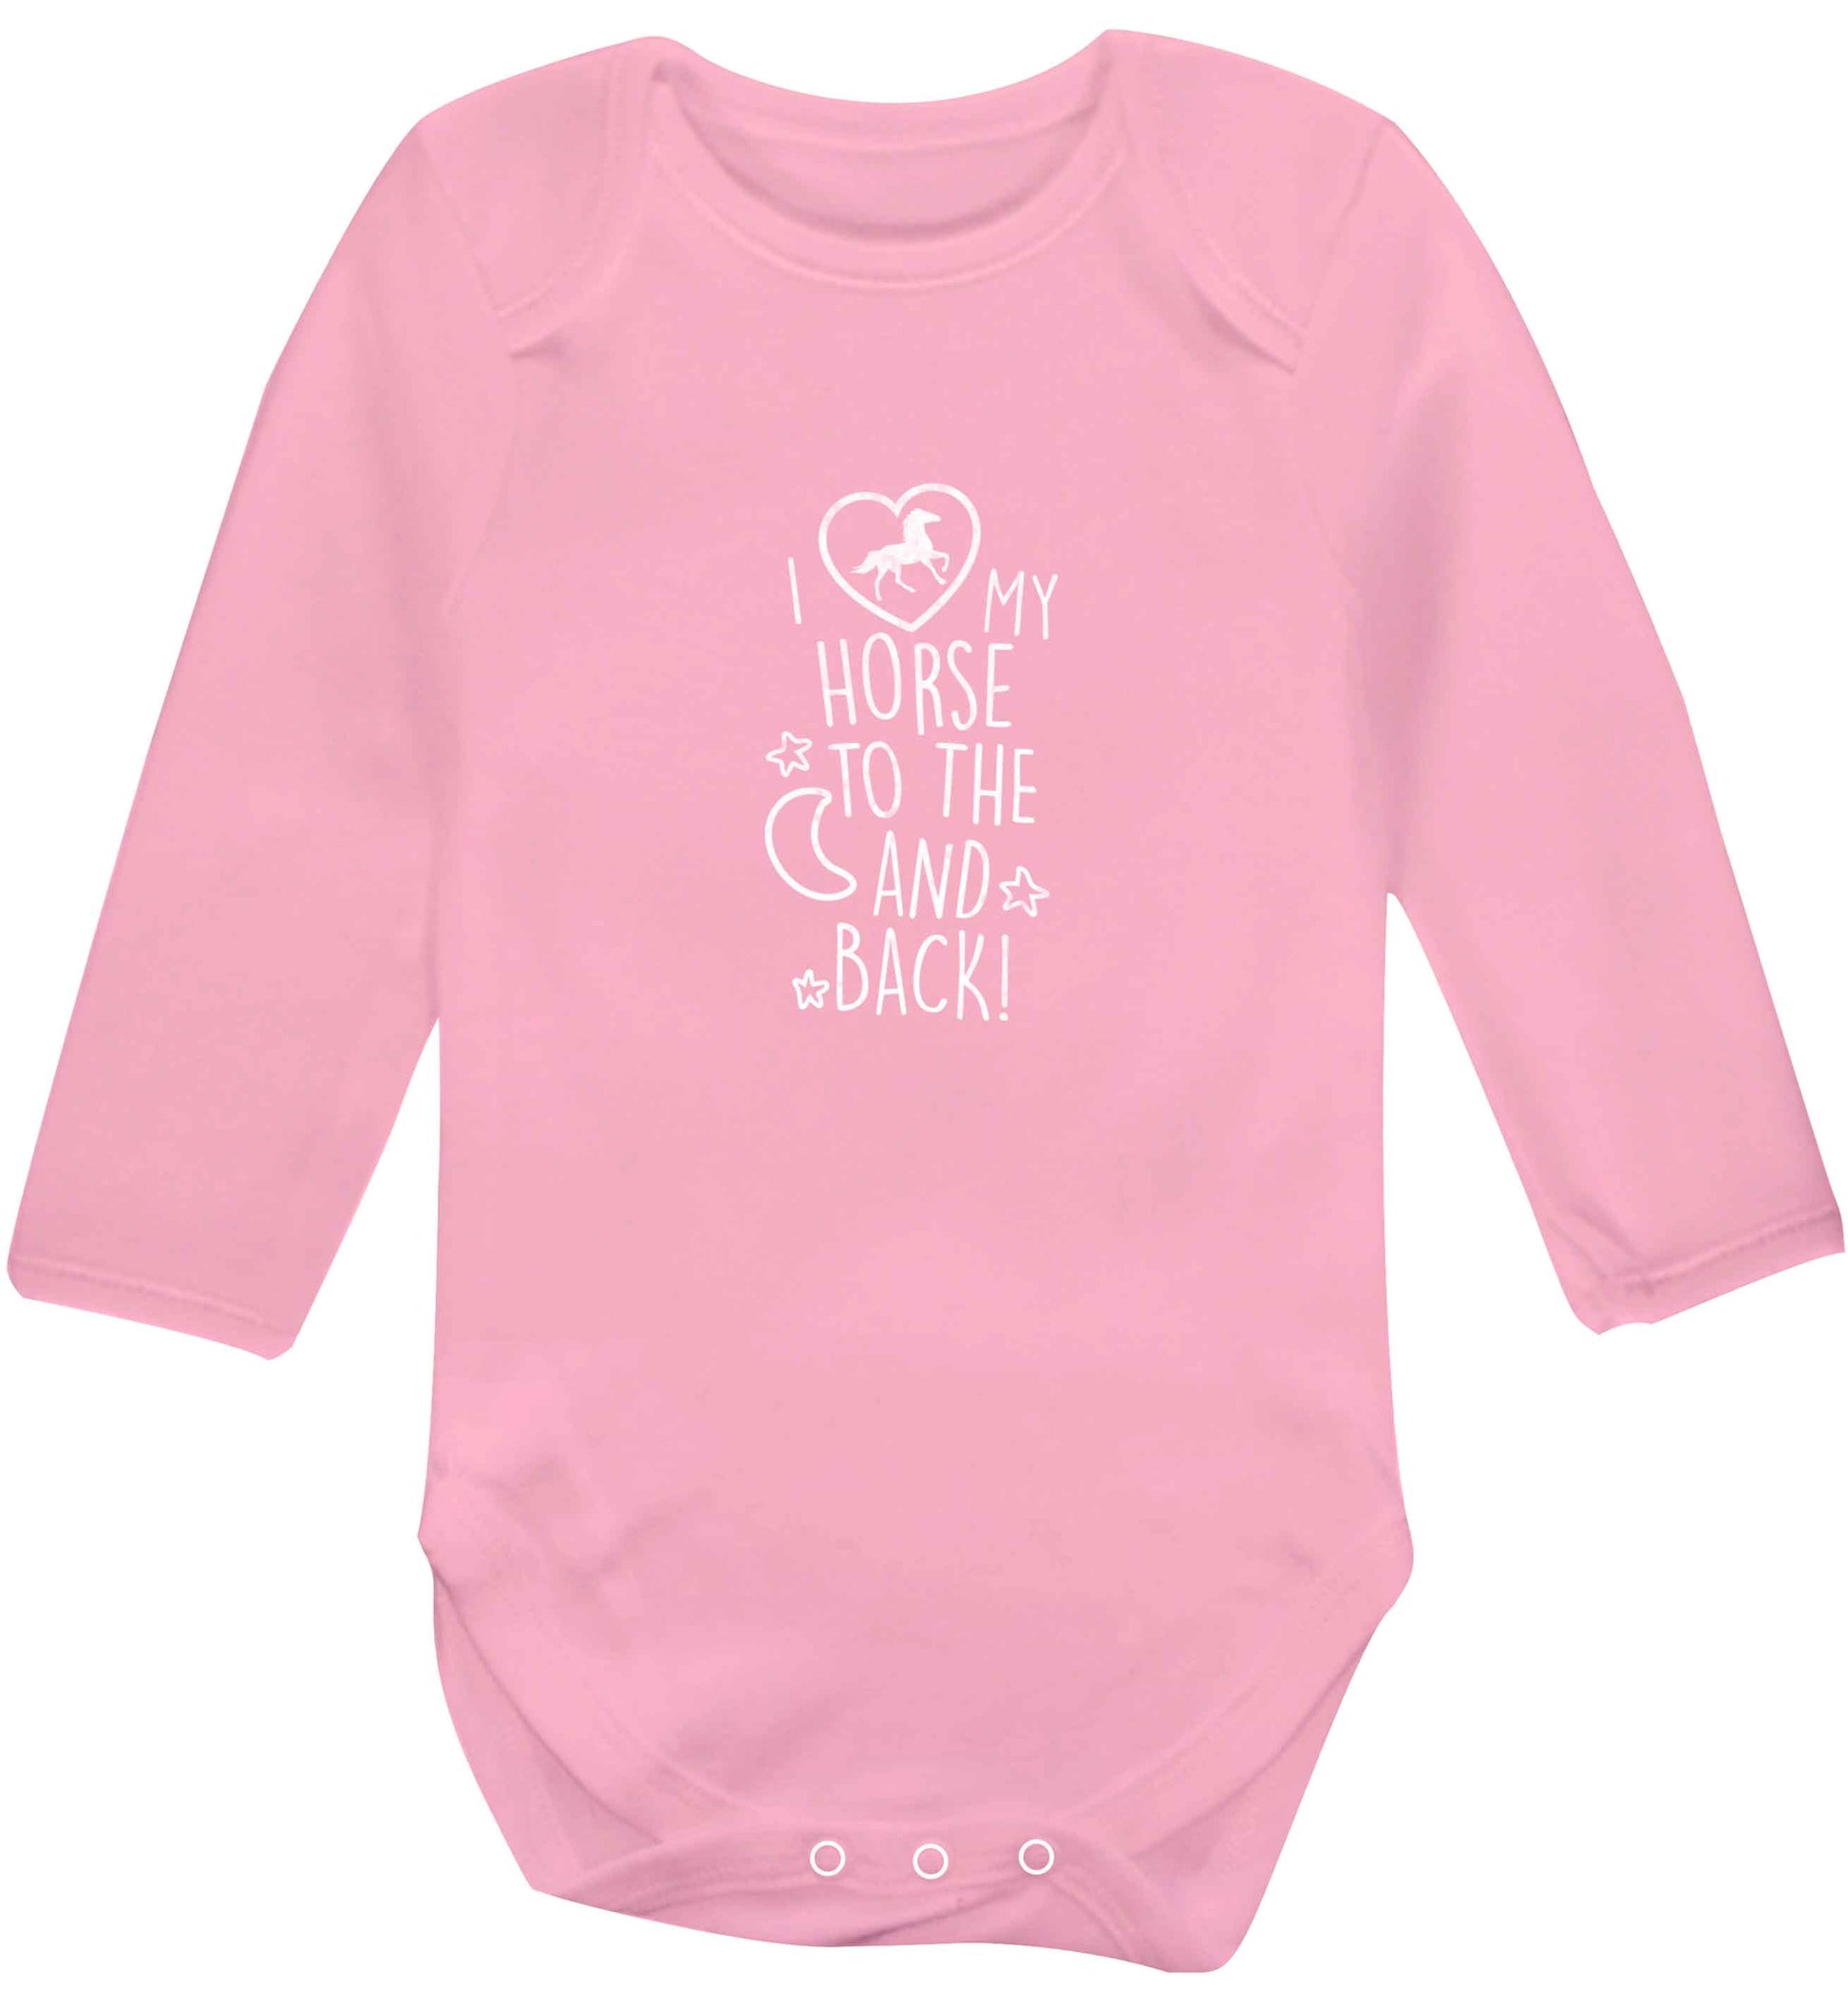 I love my horse to the moon and back baby vest long sleeved pale pink 6-12 months